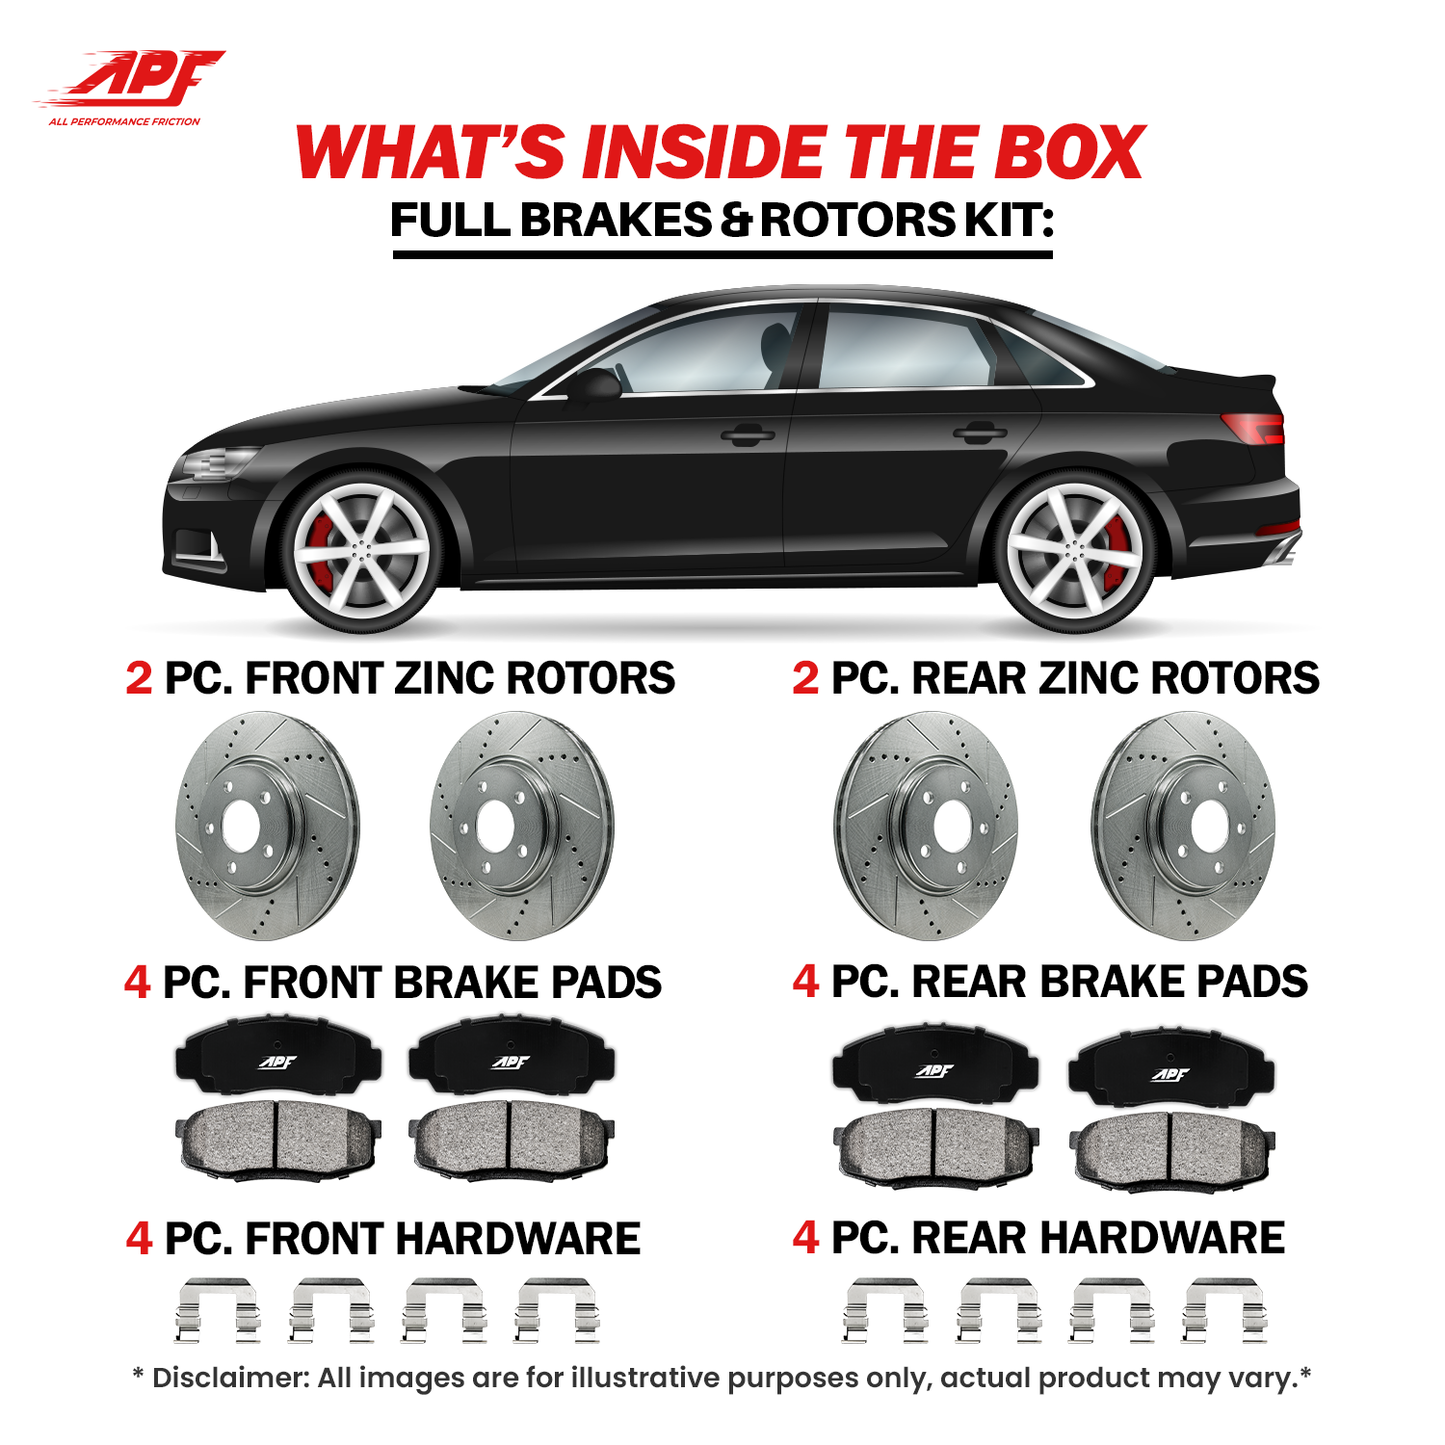 APF All Performance Friction Front and Rear Rotors and Pads Full Kit compatible with Ford Explorer 1995-2001 Zinc Drilled Slotted Rotors with Ceramic Carbon Fiber Brake Pads | $270.33